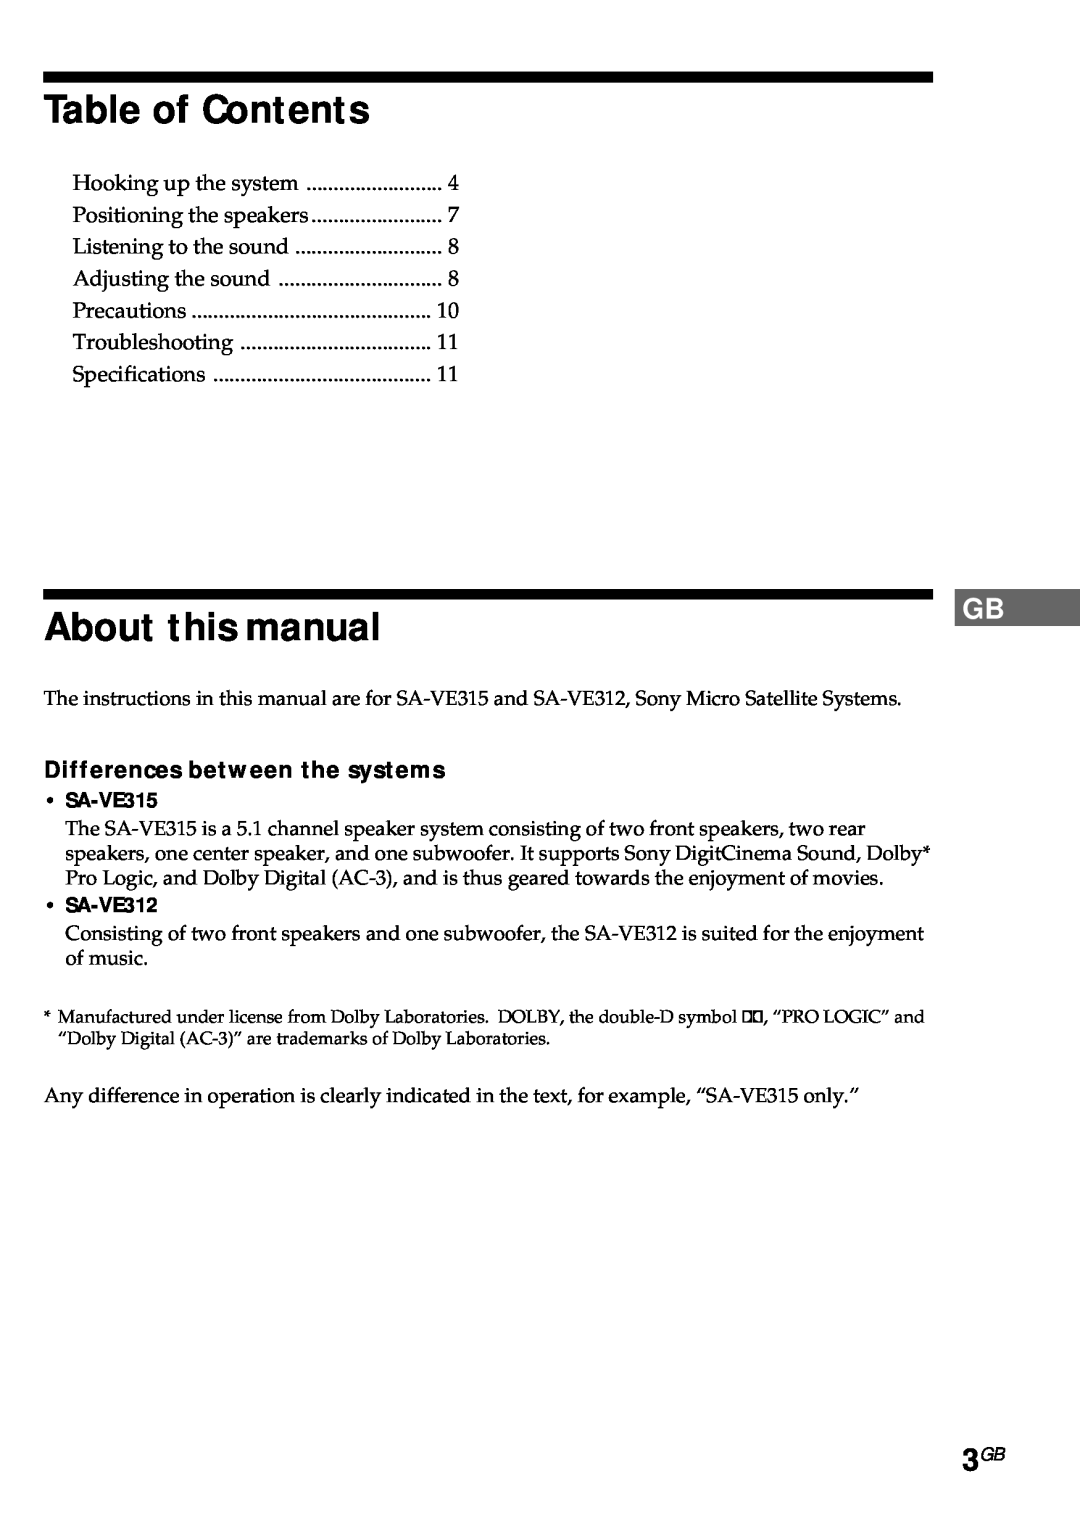 Sony SA-VE315 Table of Contents, About this manual, Differences between the systems, SA-VE312 